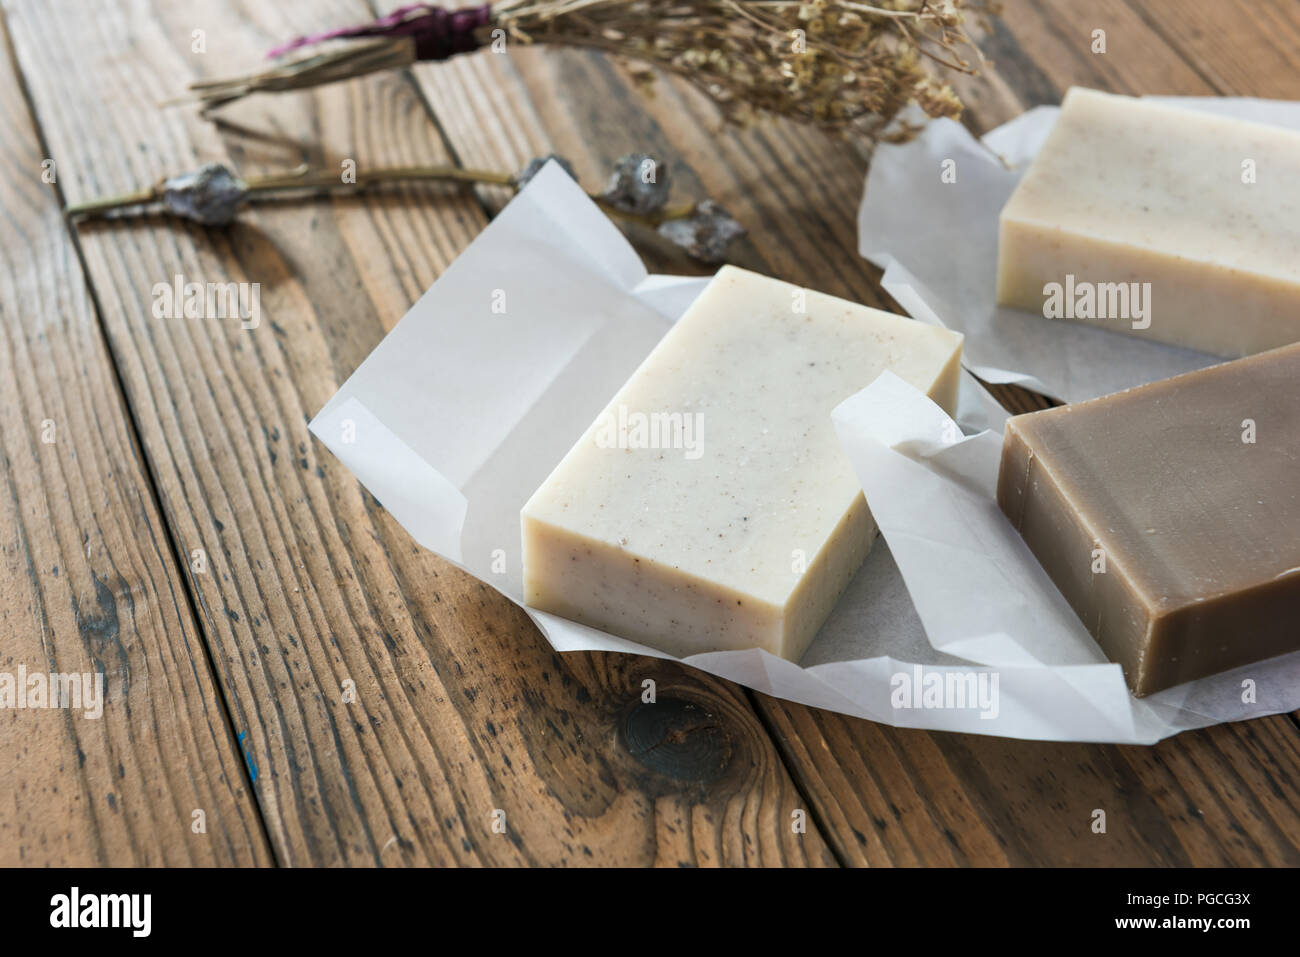 Making soap from pour and melt soap base concept. Soap making